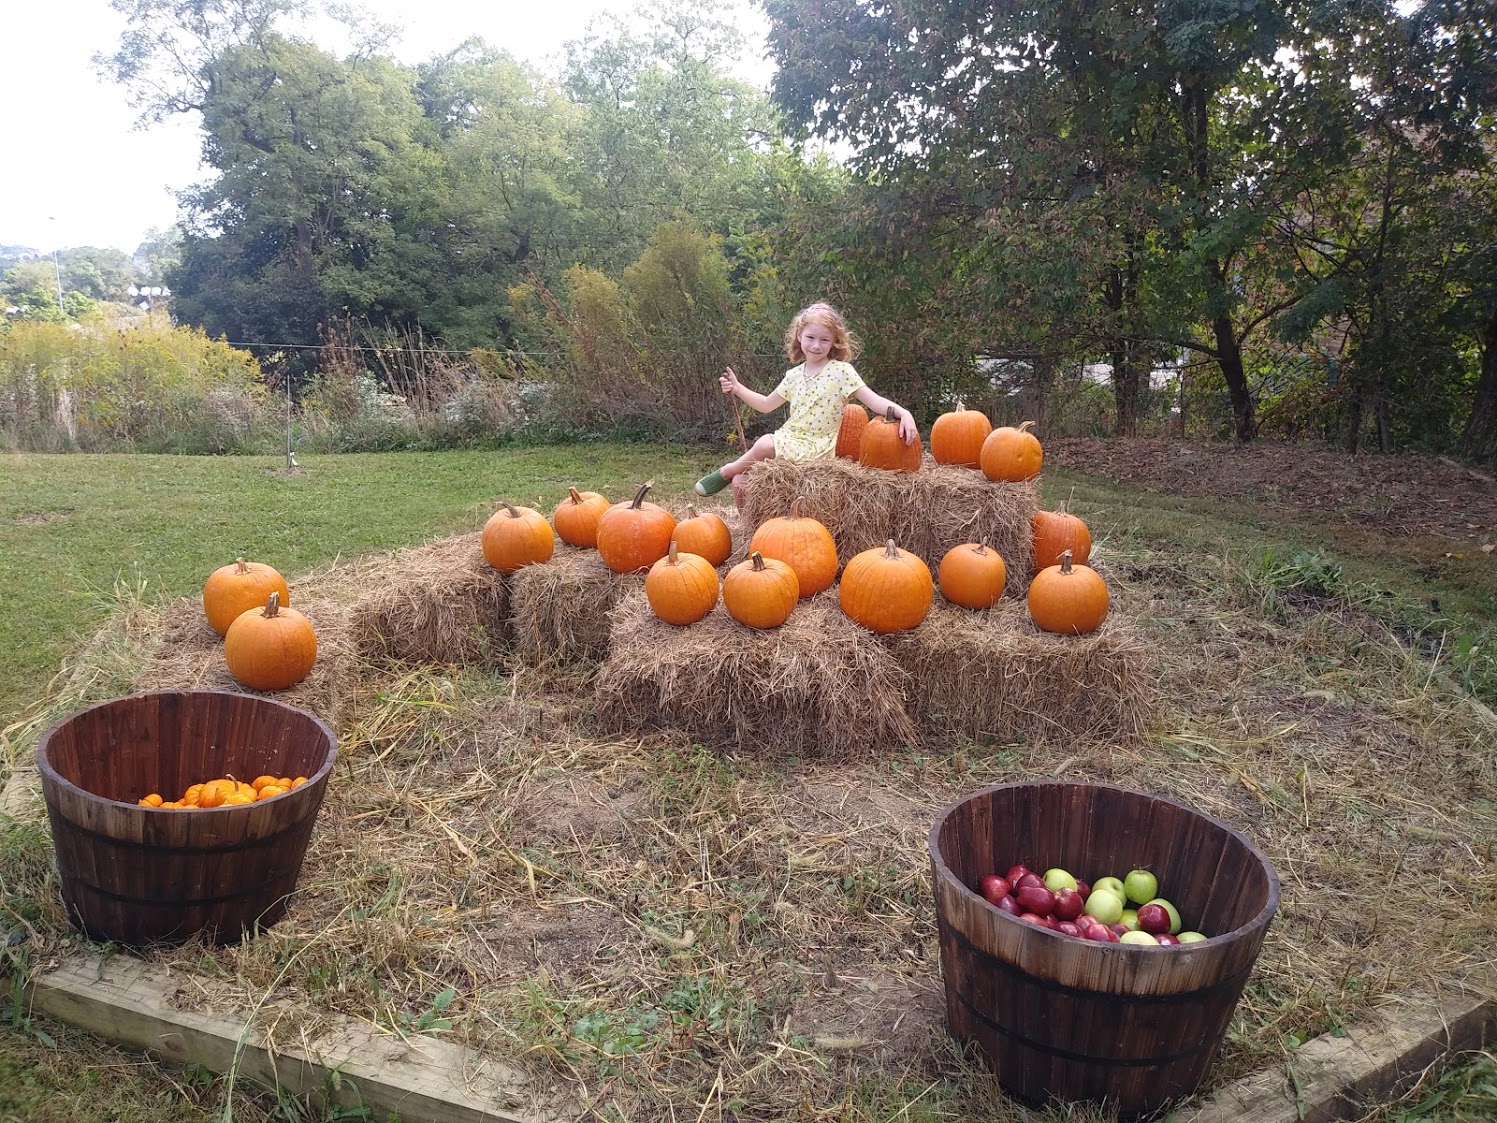 A girl sitting on hay bales with pumpkins.